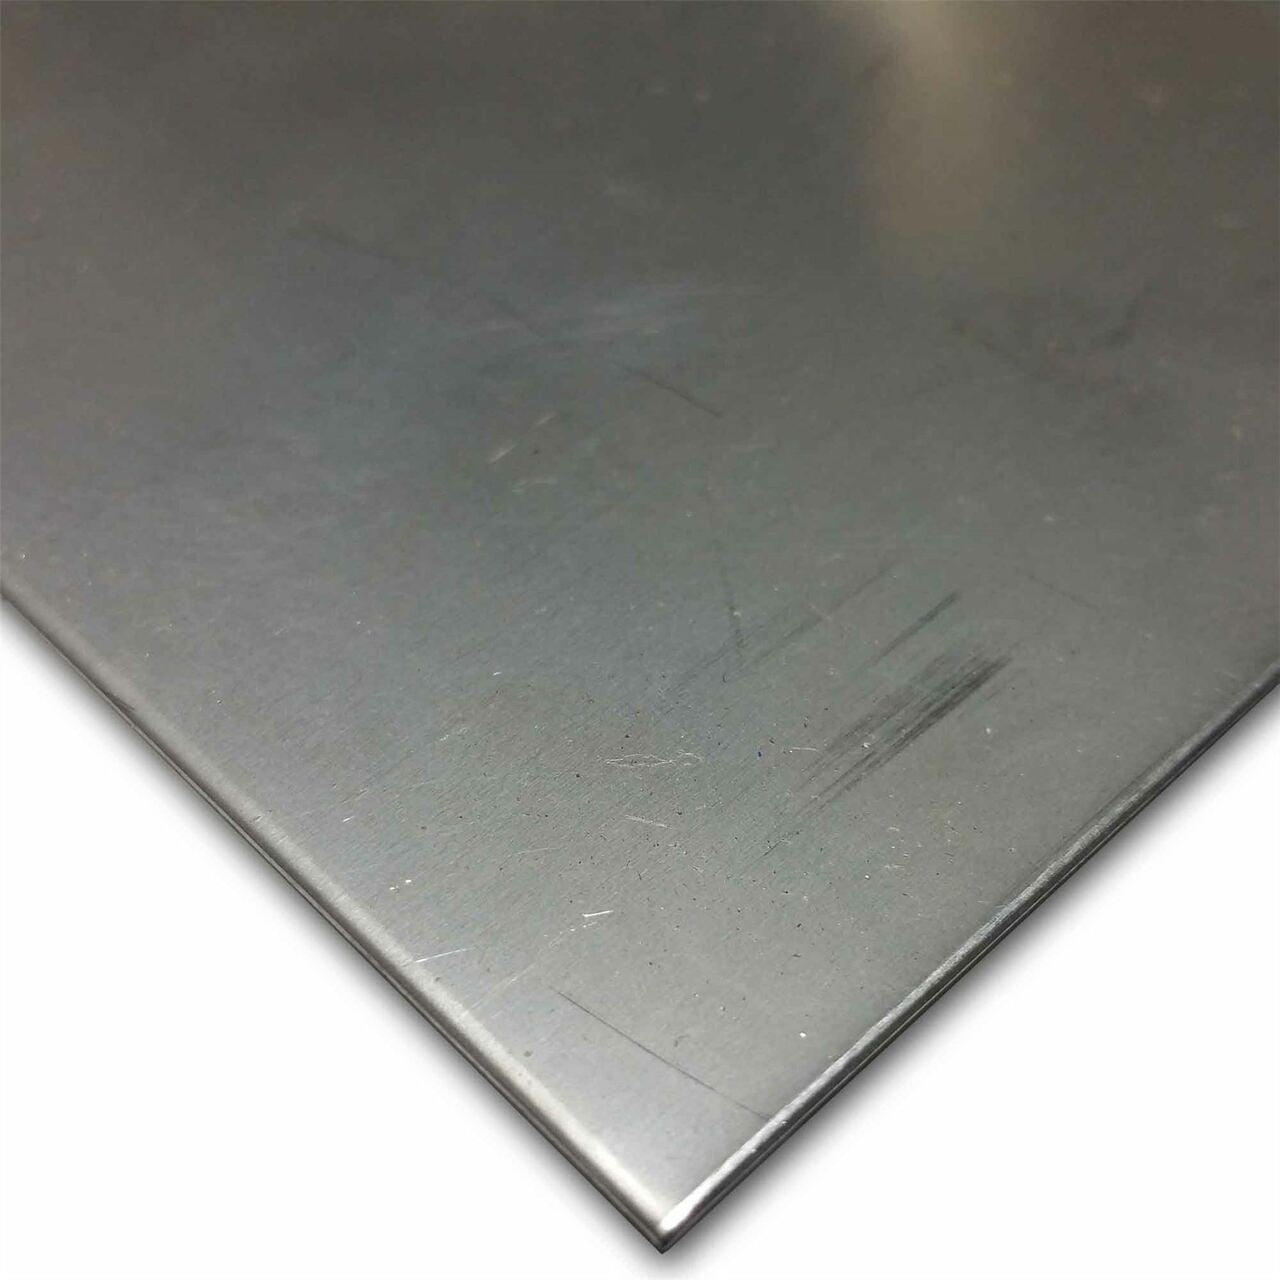 22 Gauge Stainless Steel #4 Brushed 304 Sheet Plate 4" x 4" Set of 4 